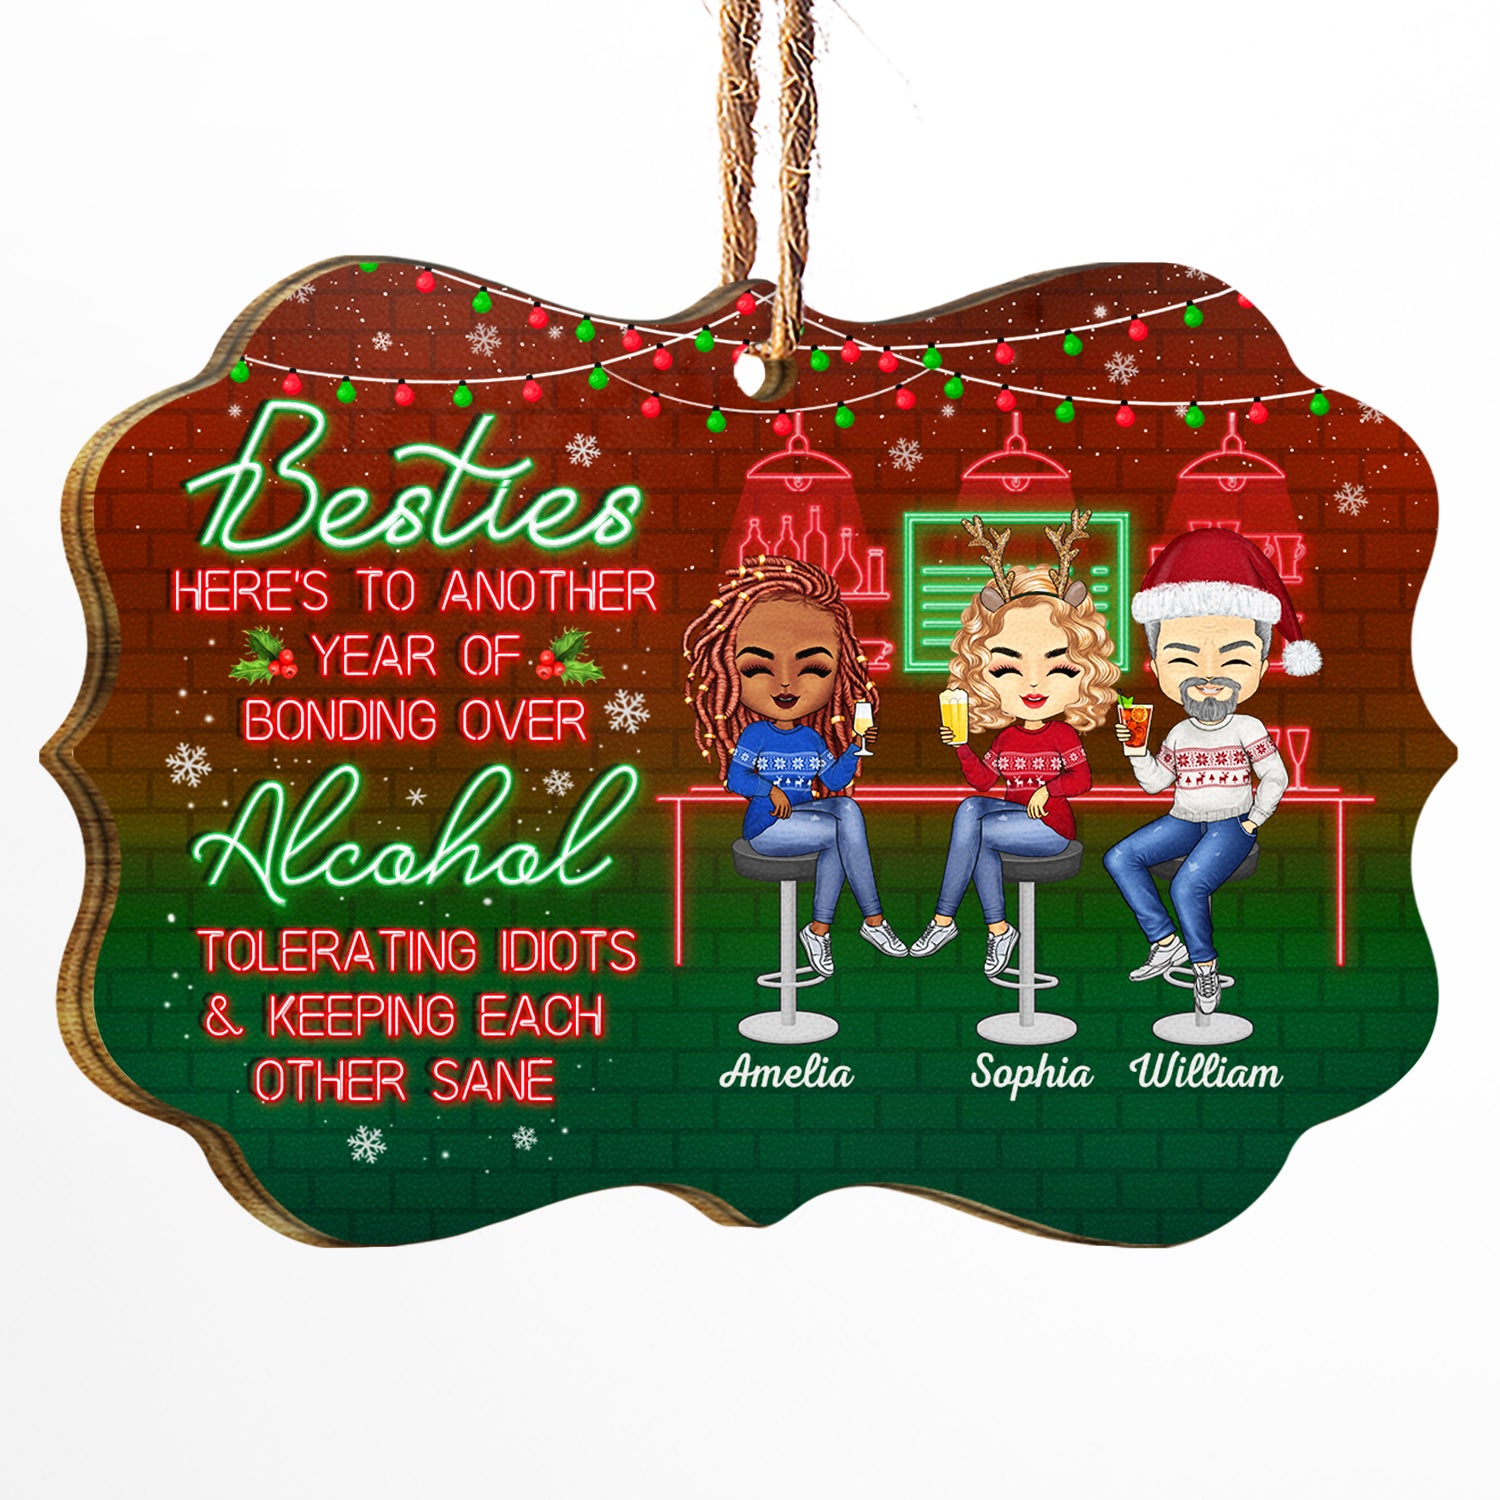 Here's To Another Year Of Bonding Over Alcohol Aged Option Christmas Best Friends - Bestie BFF Gift - Personalized Custom Wooden Ornament, Aluminum Ornament